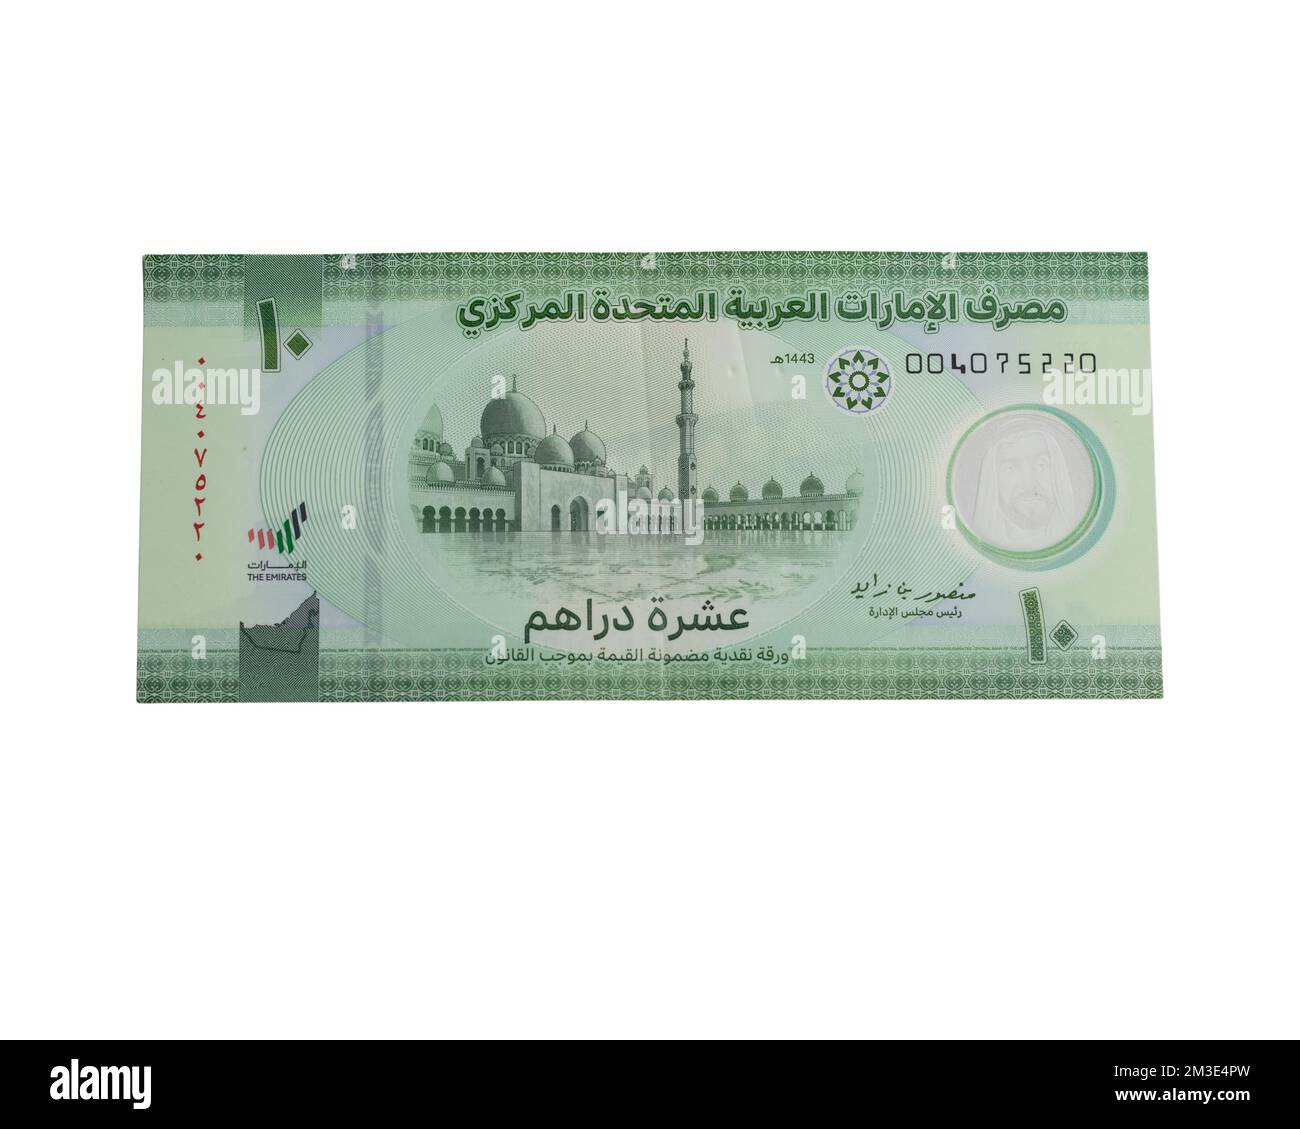 The new polymer ten dirham United arab emirate bank note with a Sheikh Zayed Grand Mosque in Abu Dhabi illustrates on the front side Stock Photo